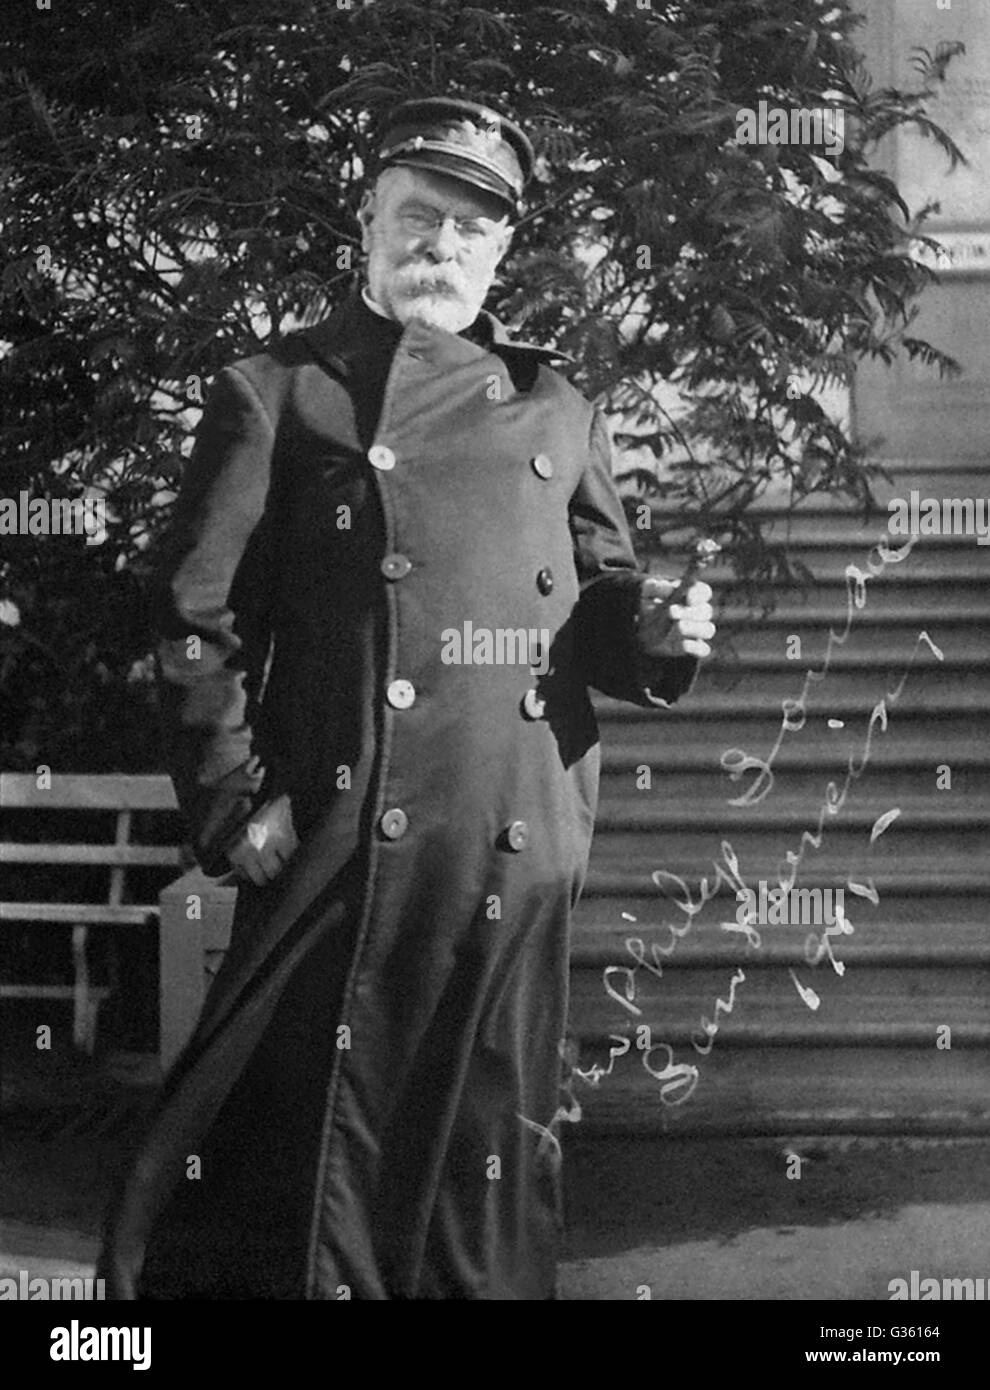 John Philip Sousa, the legendary composer and conductor of military and patriotic marches, at the San Francisco Panama-Pacific International Exposition in 1915. Stock Photo